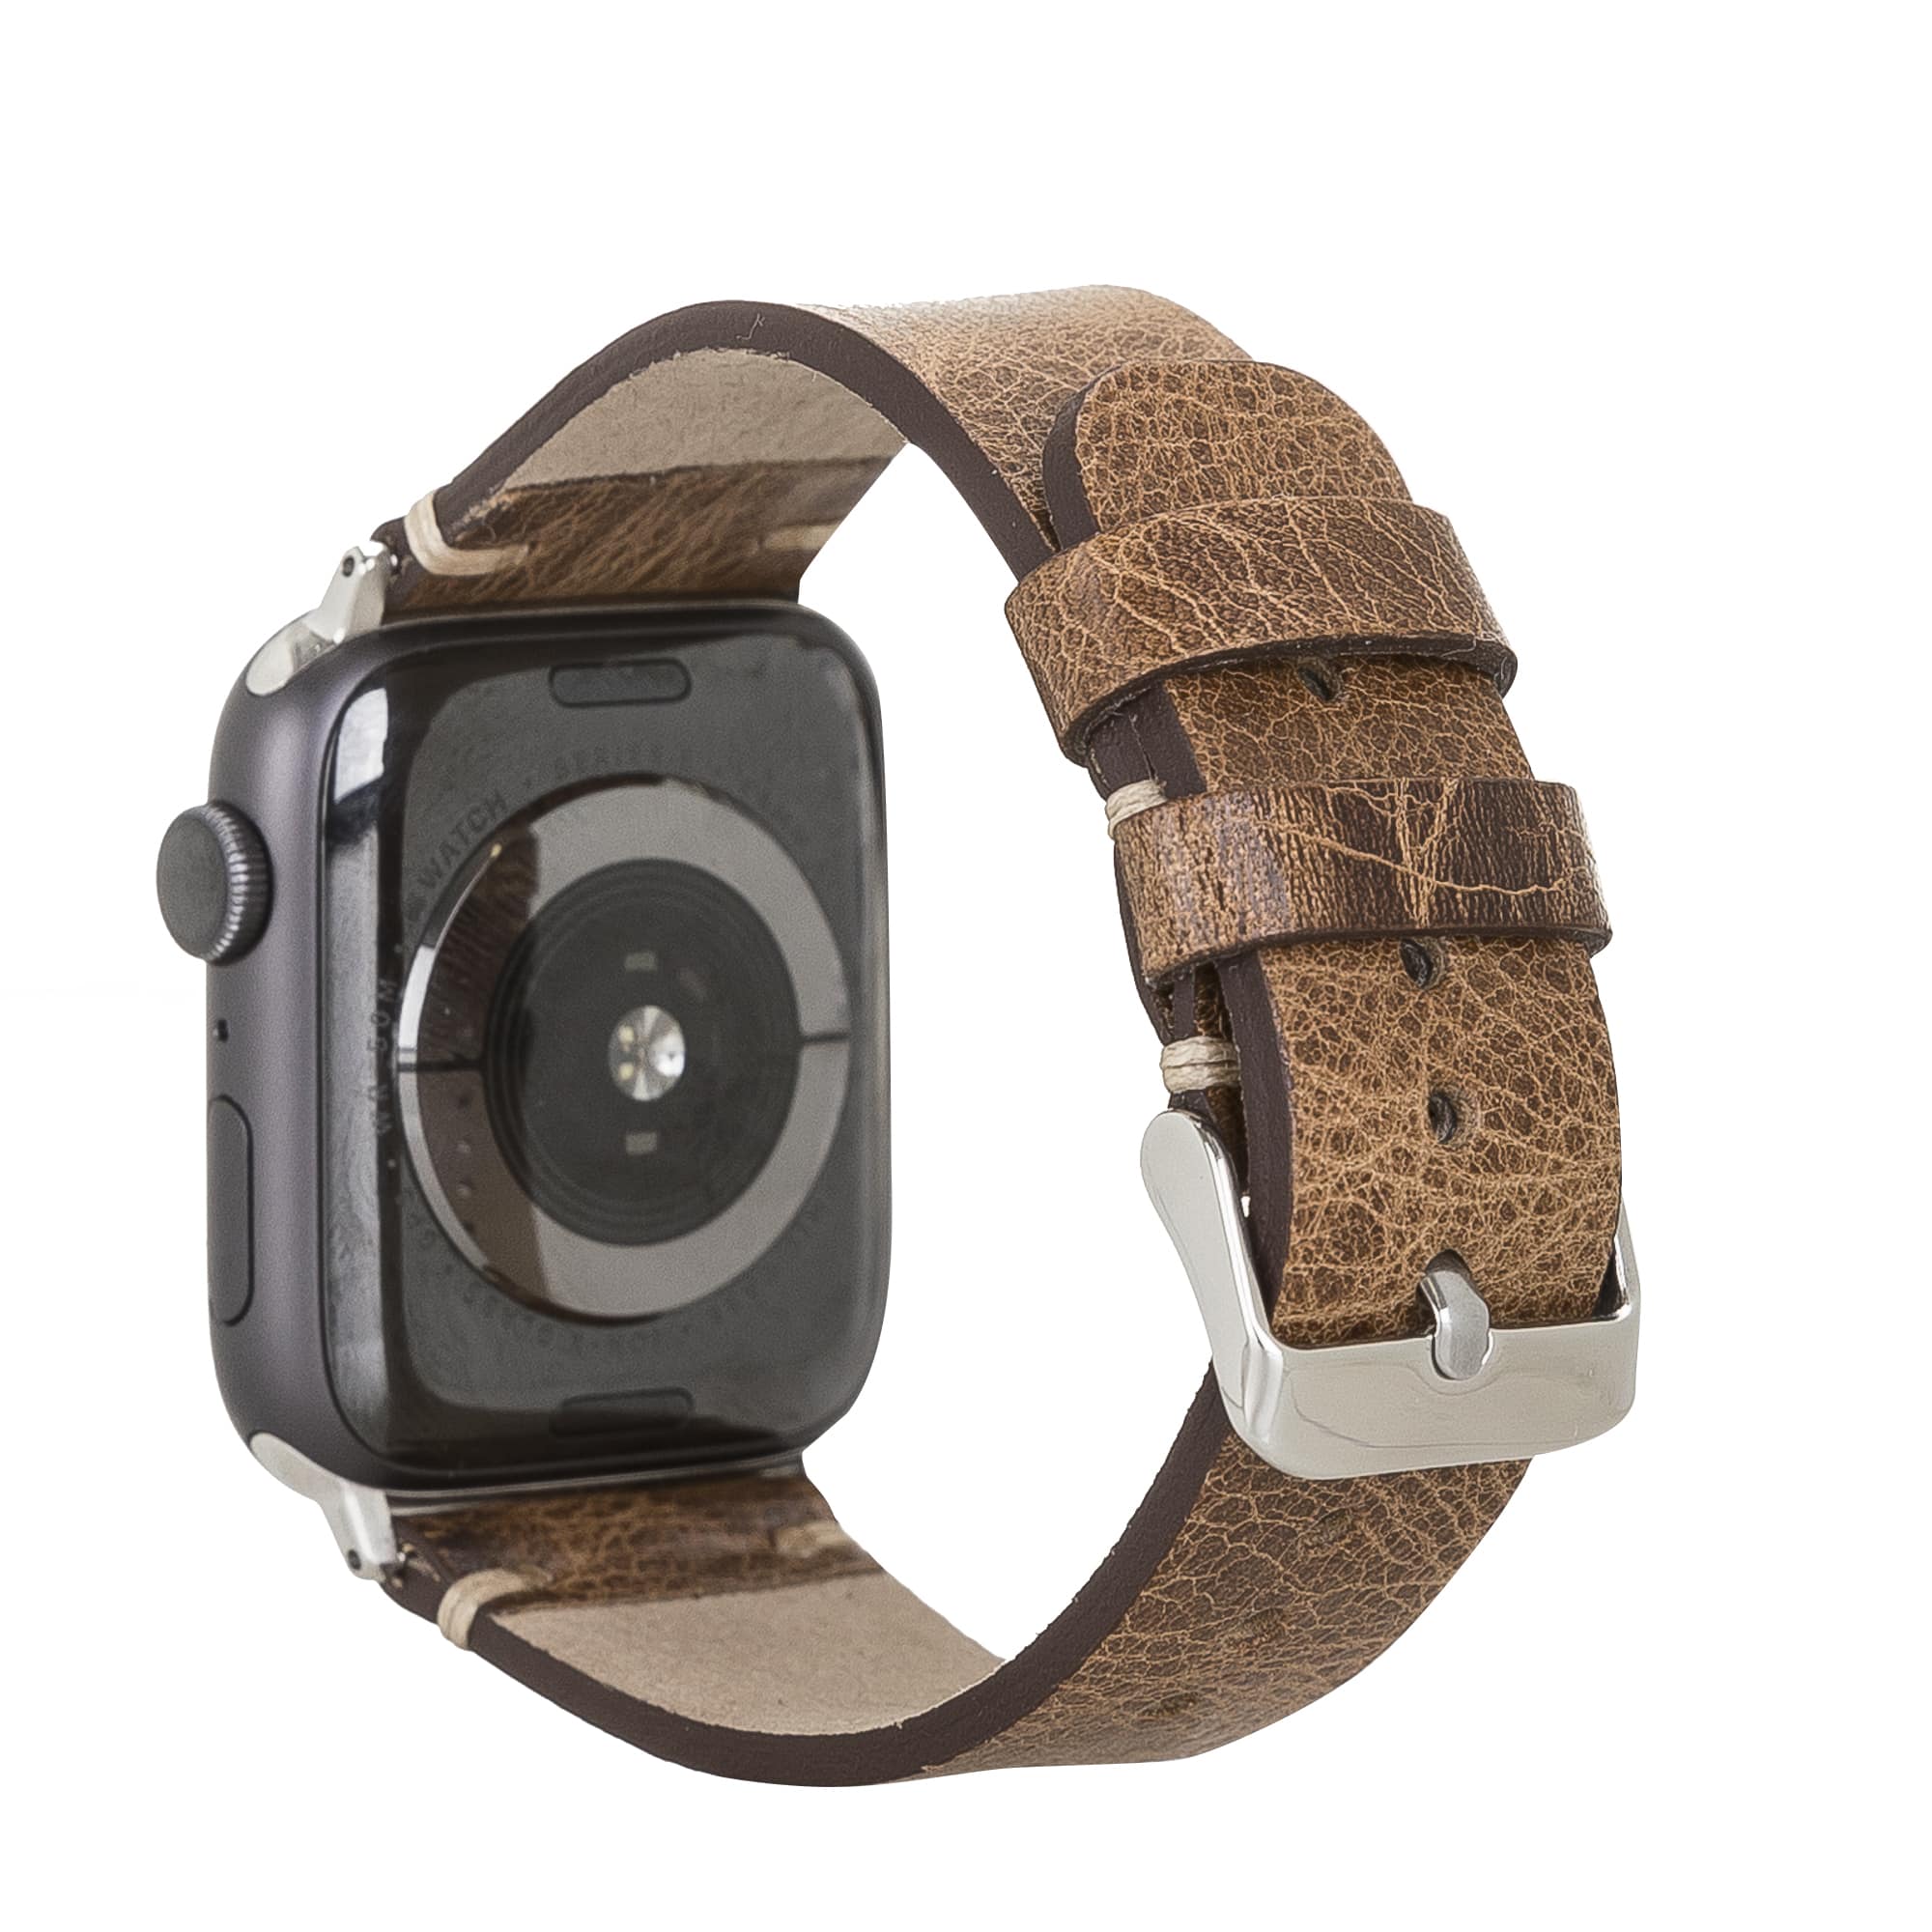 Richmond Classic Brown Genuine Leather Apple Watch Band Strap 38mm 40mm 42mm 44mm 45mm for All Series - Bomonti - 2